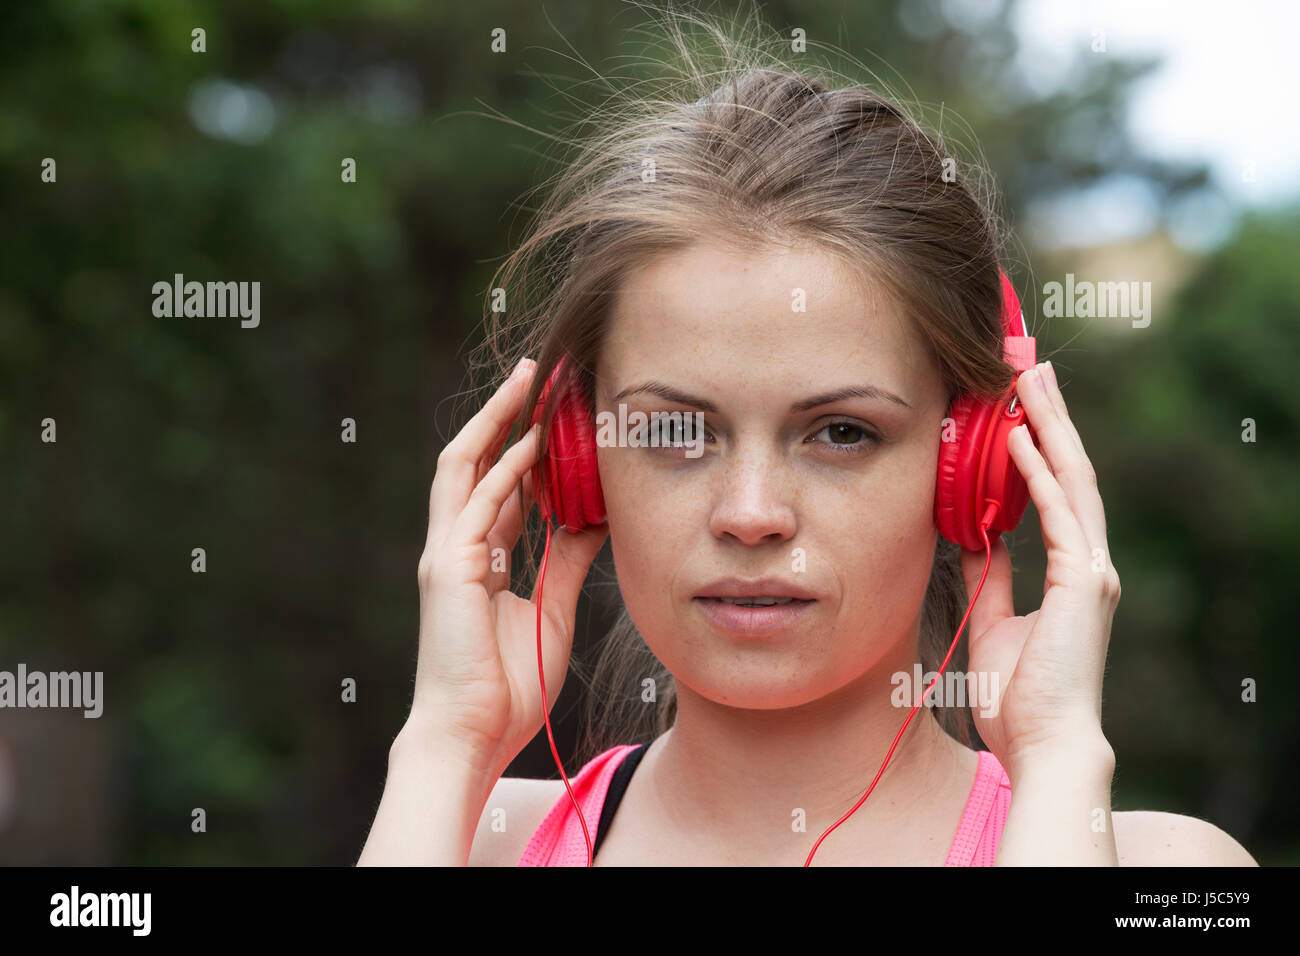 Active woman listening to music on her headphones as she exercises outside. Action and healthy lifestyle concept. Stock Photo